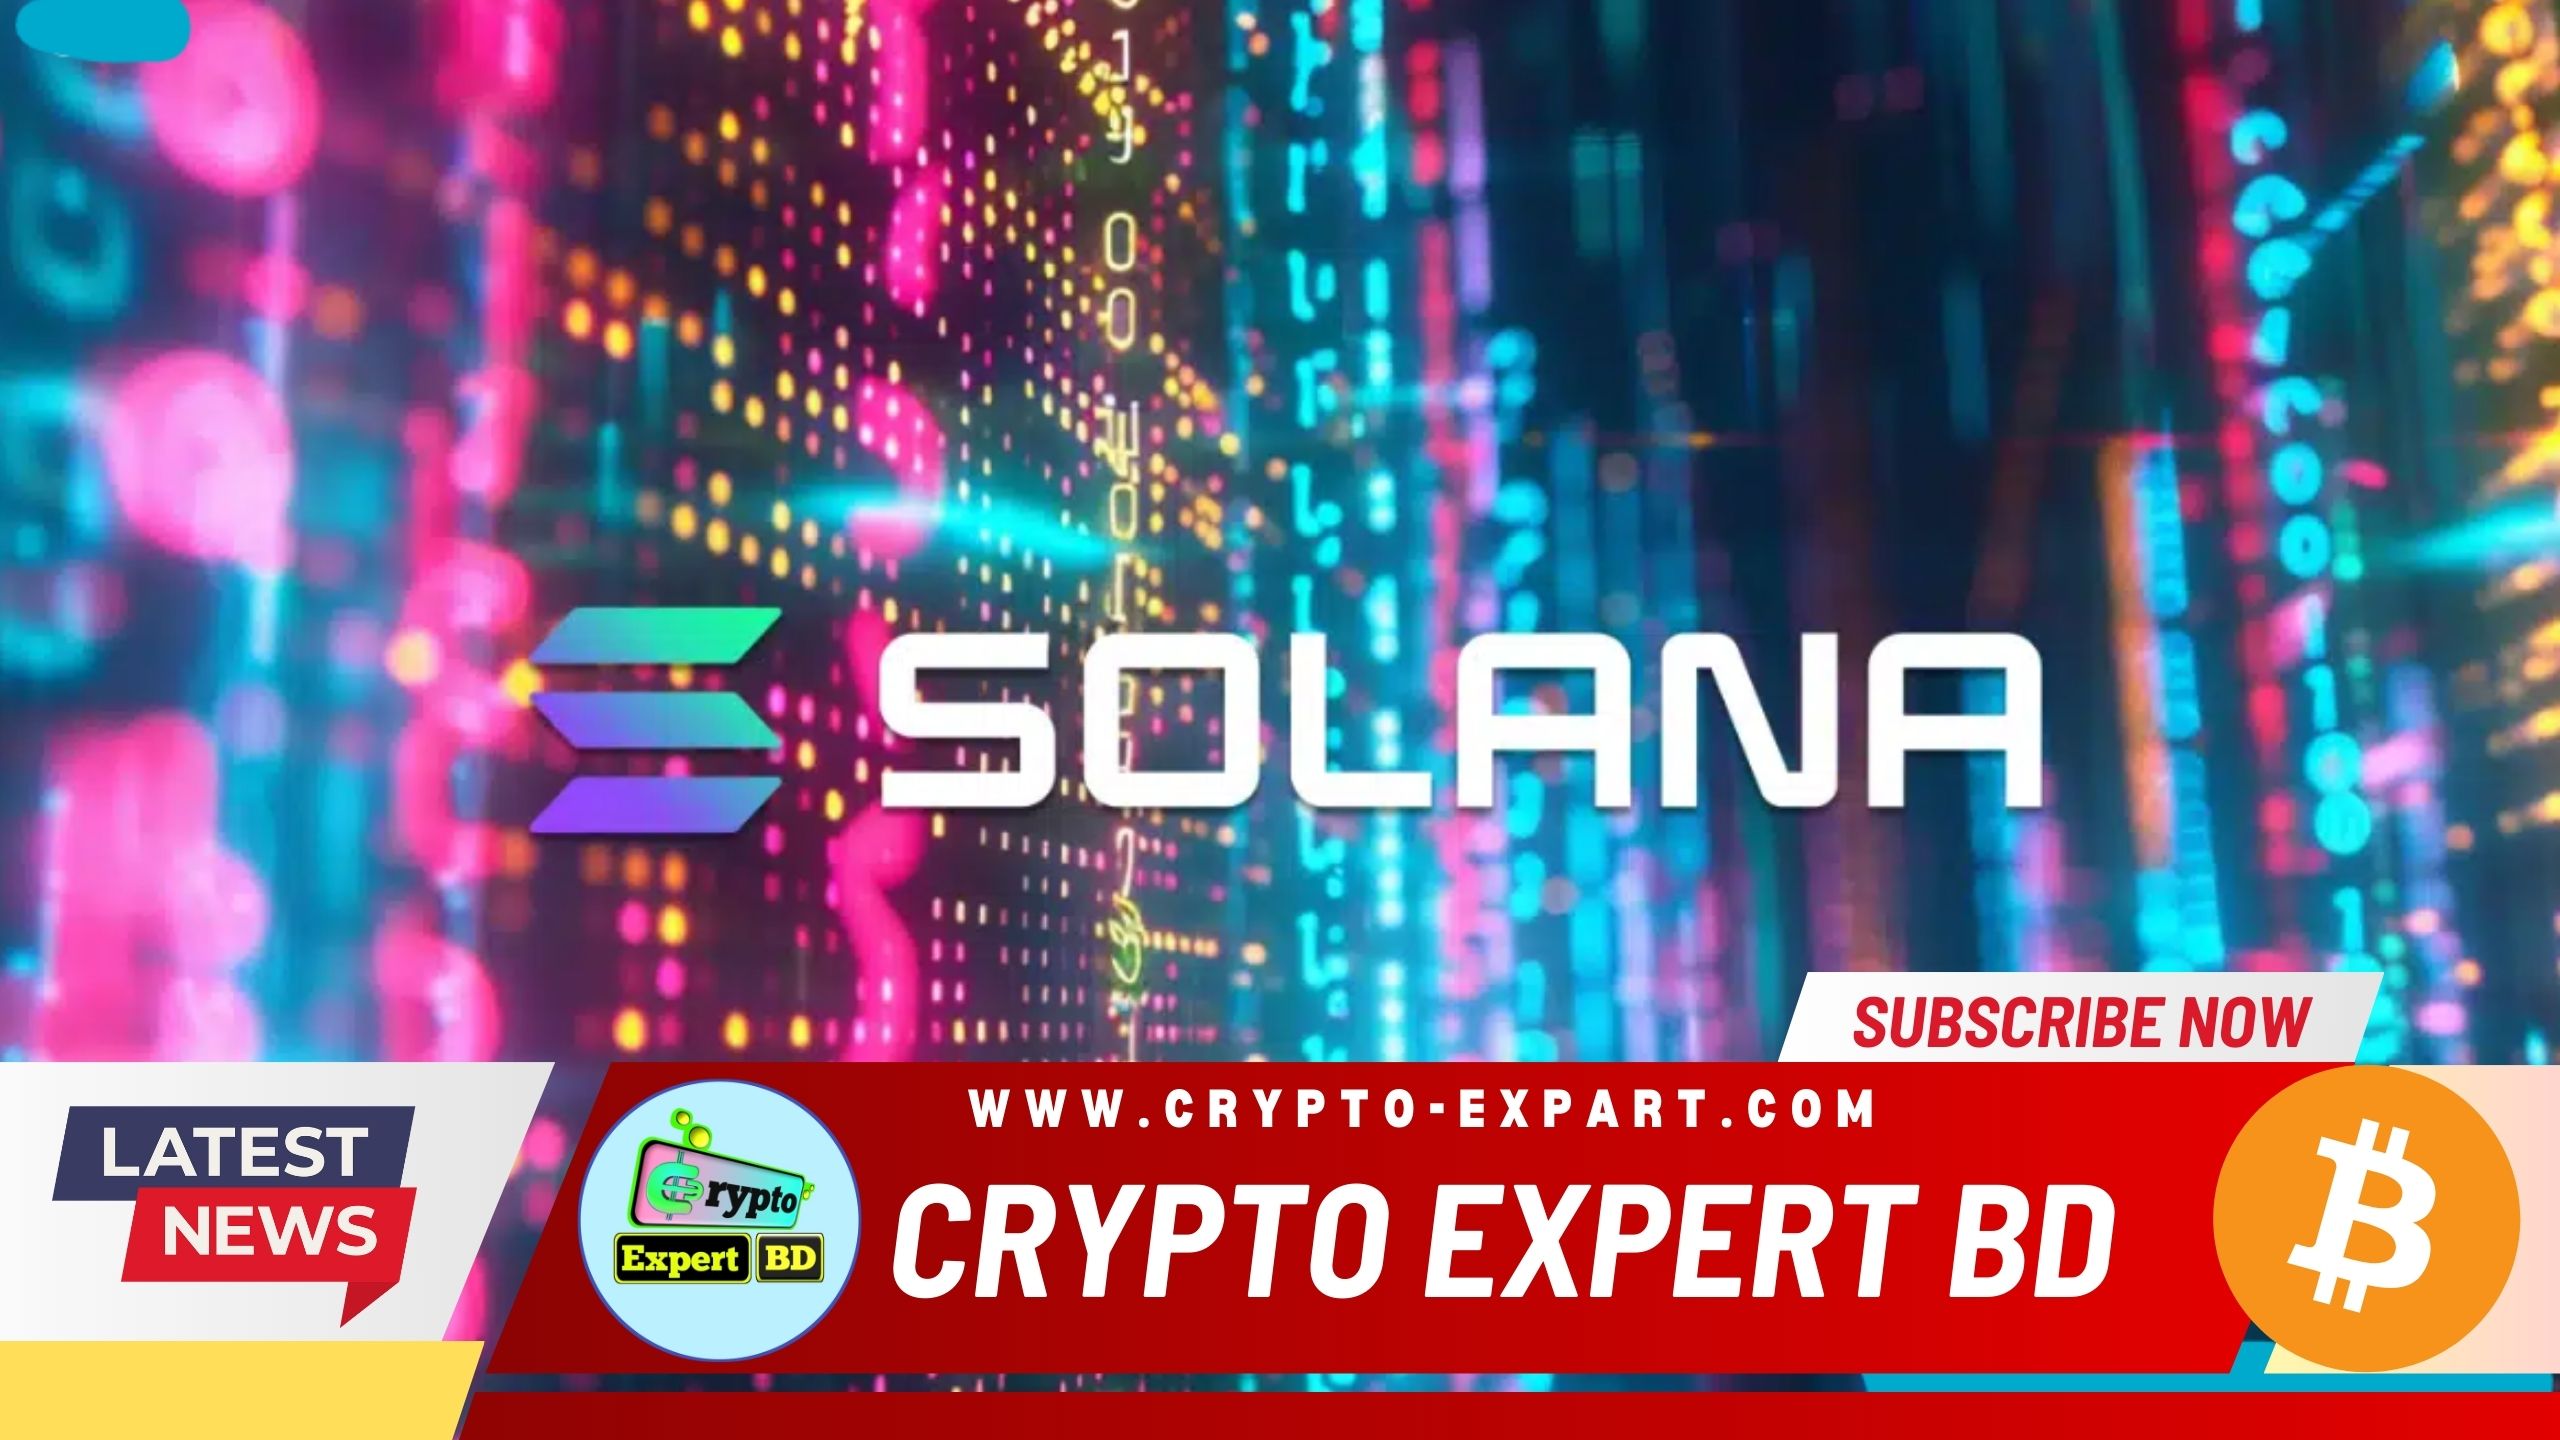 Solana Meme Coin Madness: Trader Loses $46,000 in 3 Minutes While Another Nets $310,000